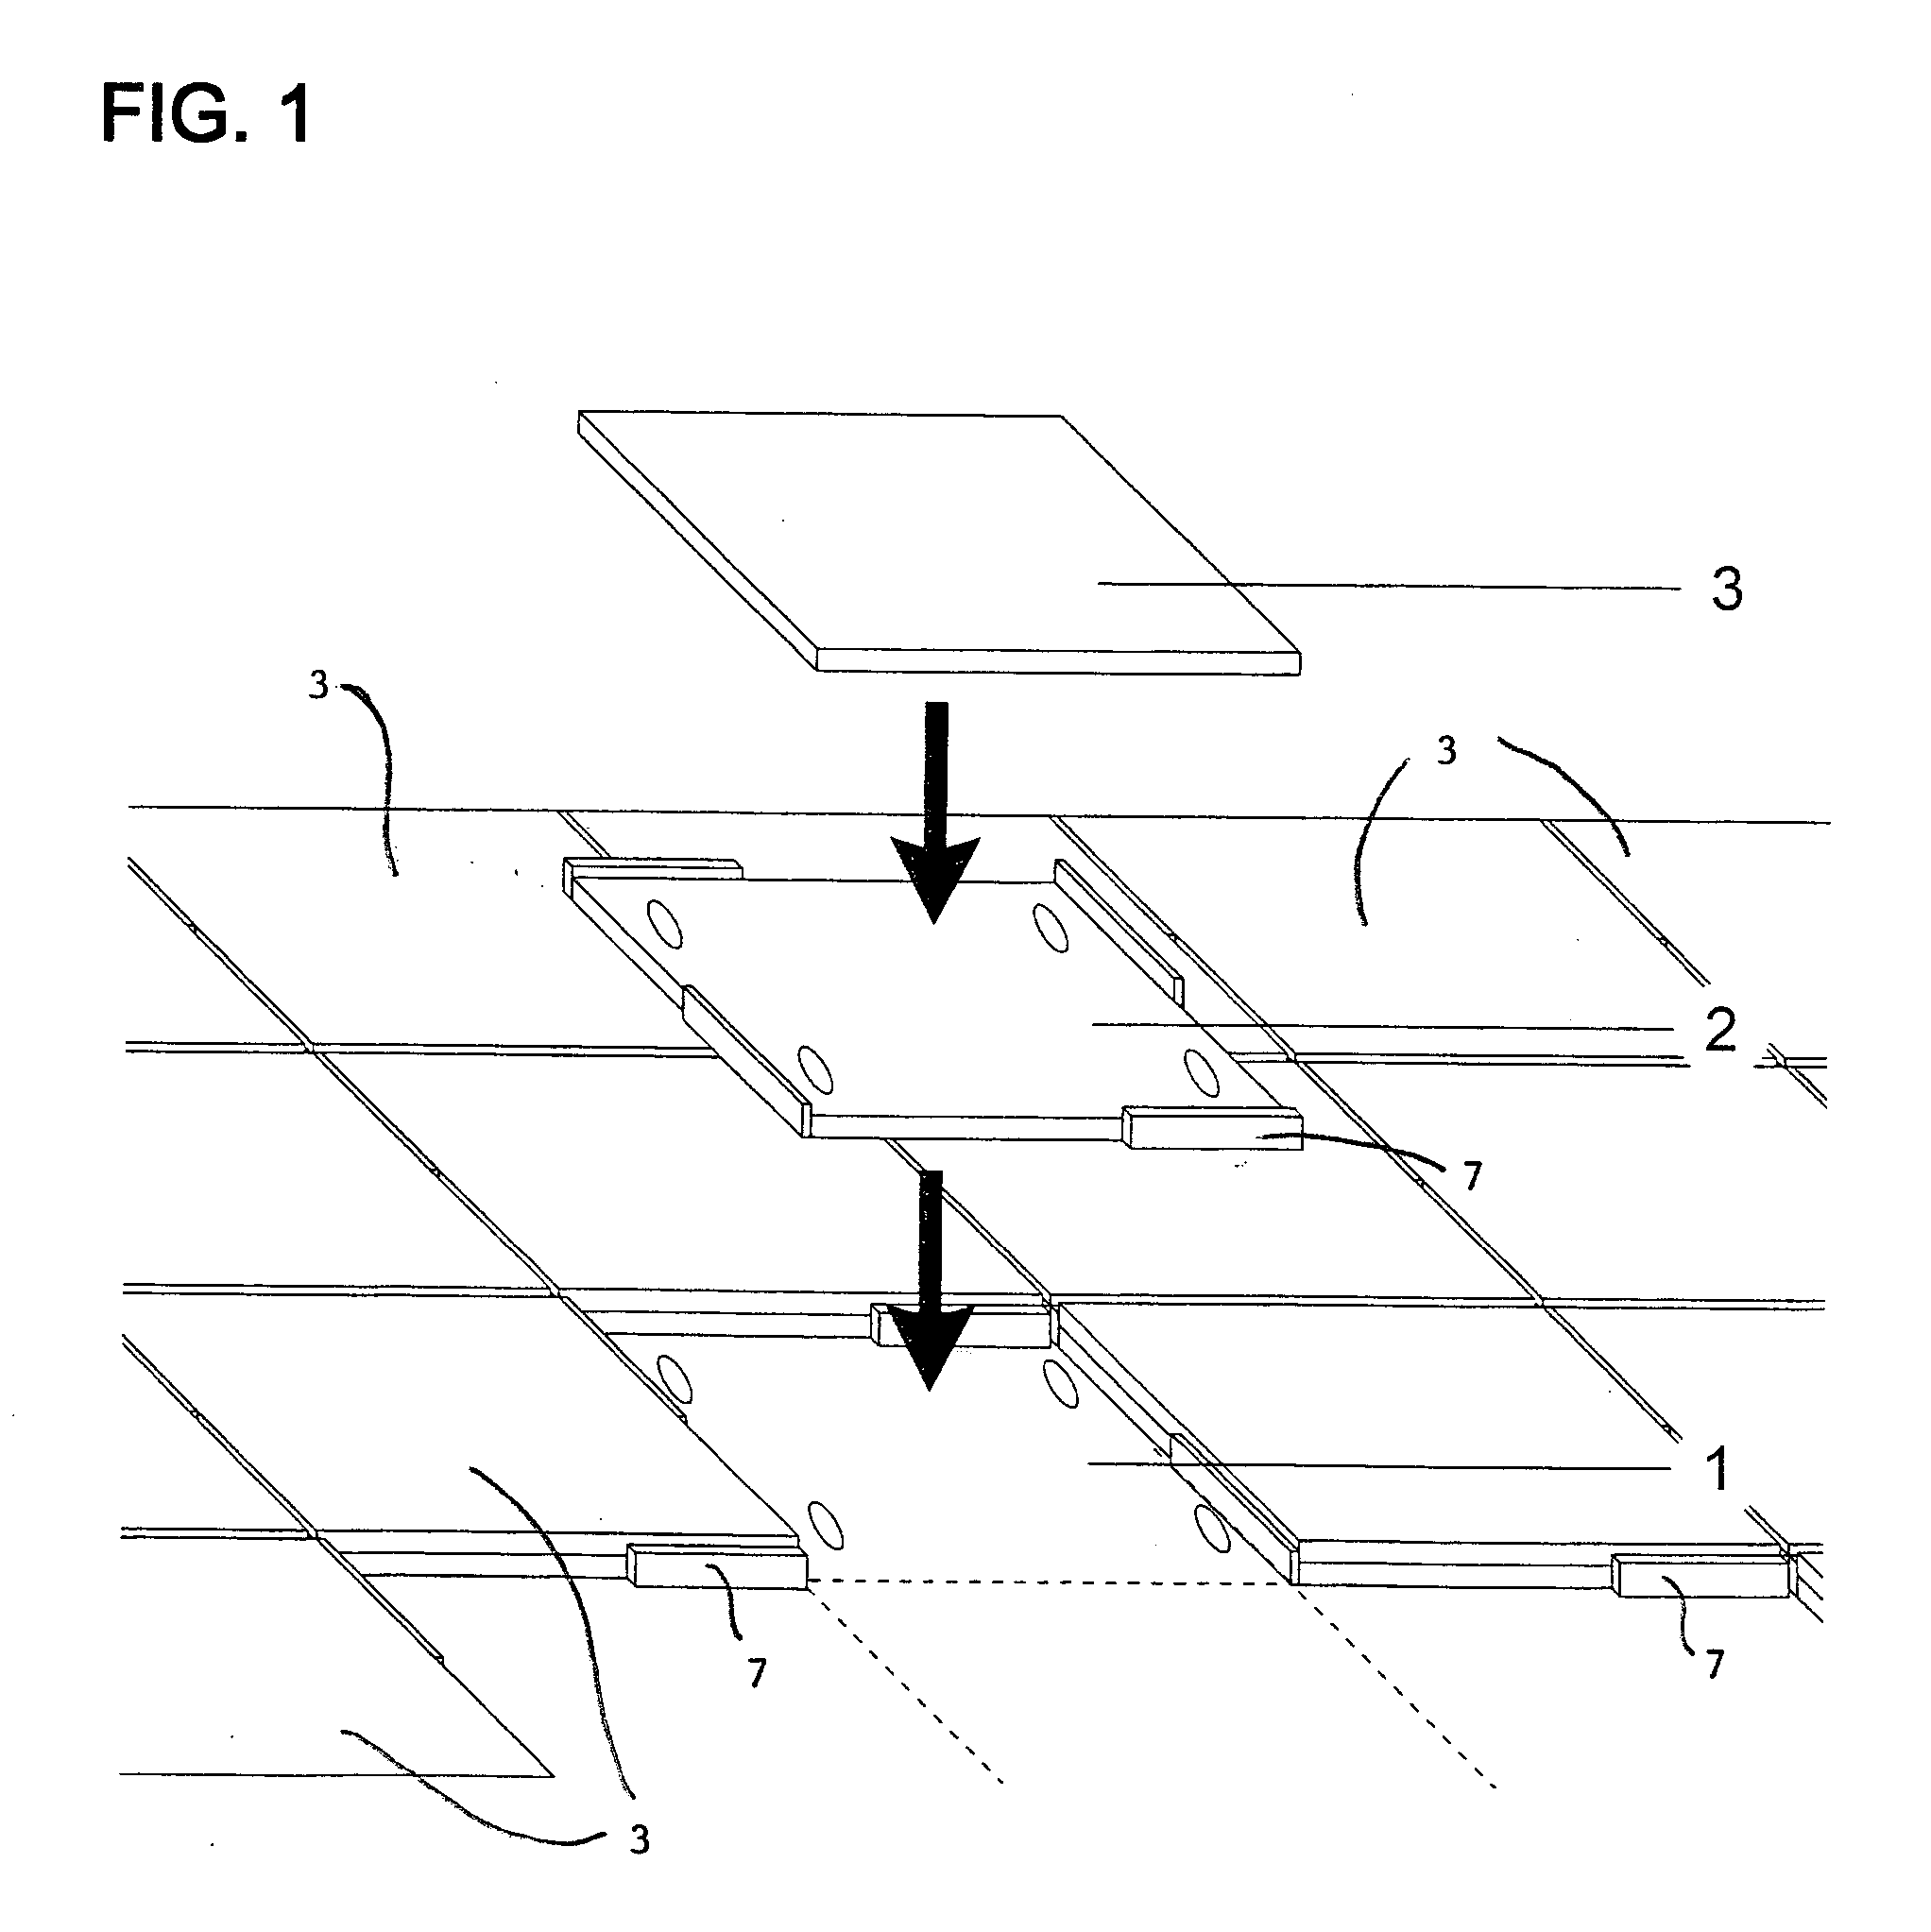 System for laying and substituting facing overlays, a method for laying and removing facing overlays, and a flexible support means